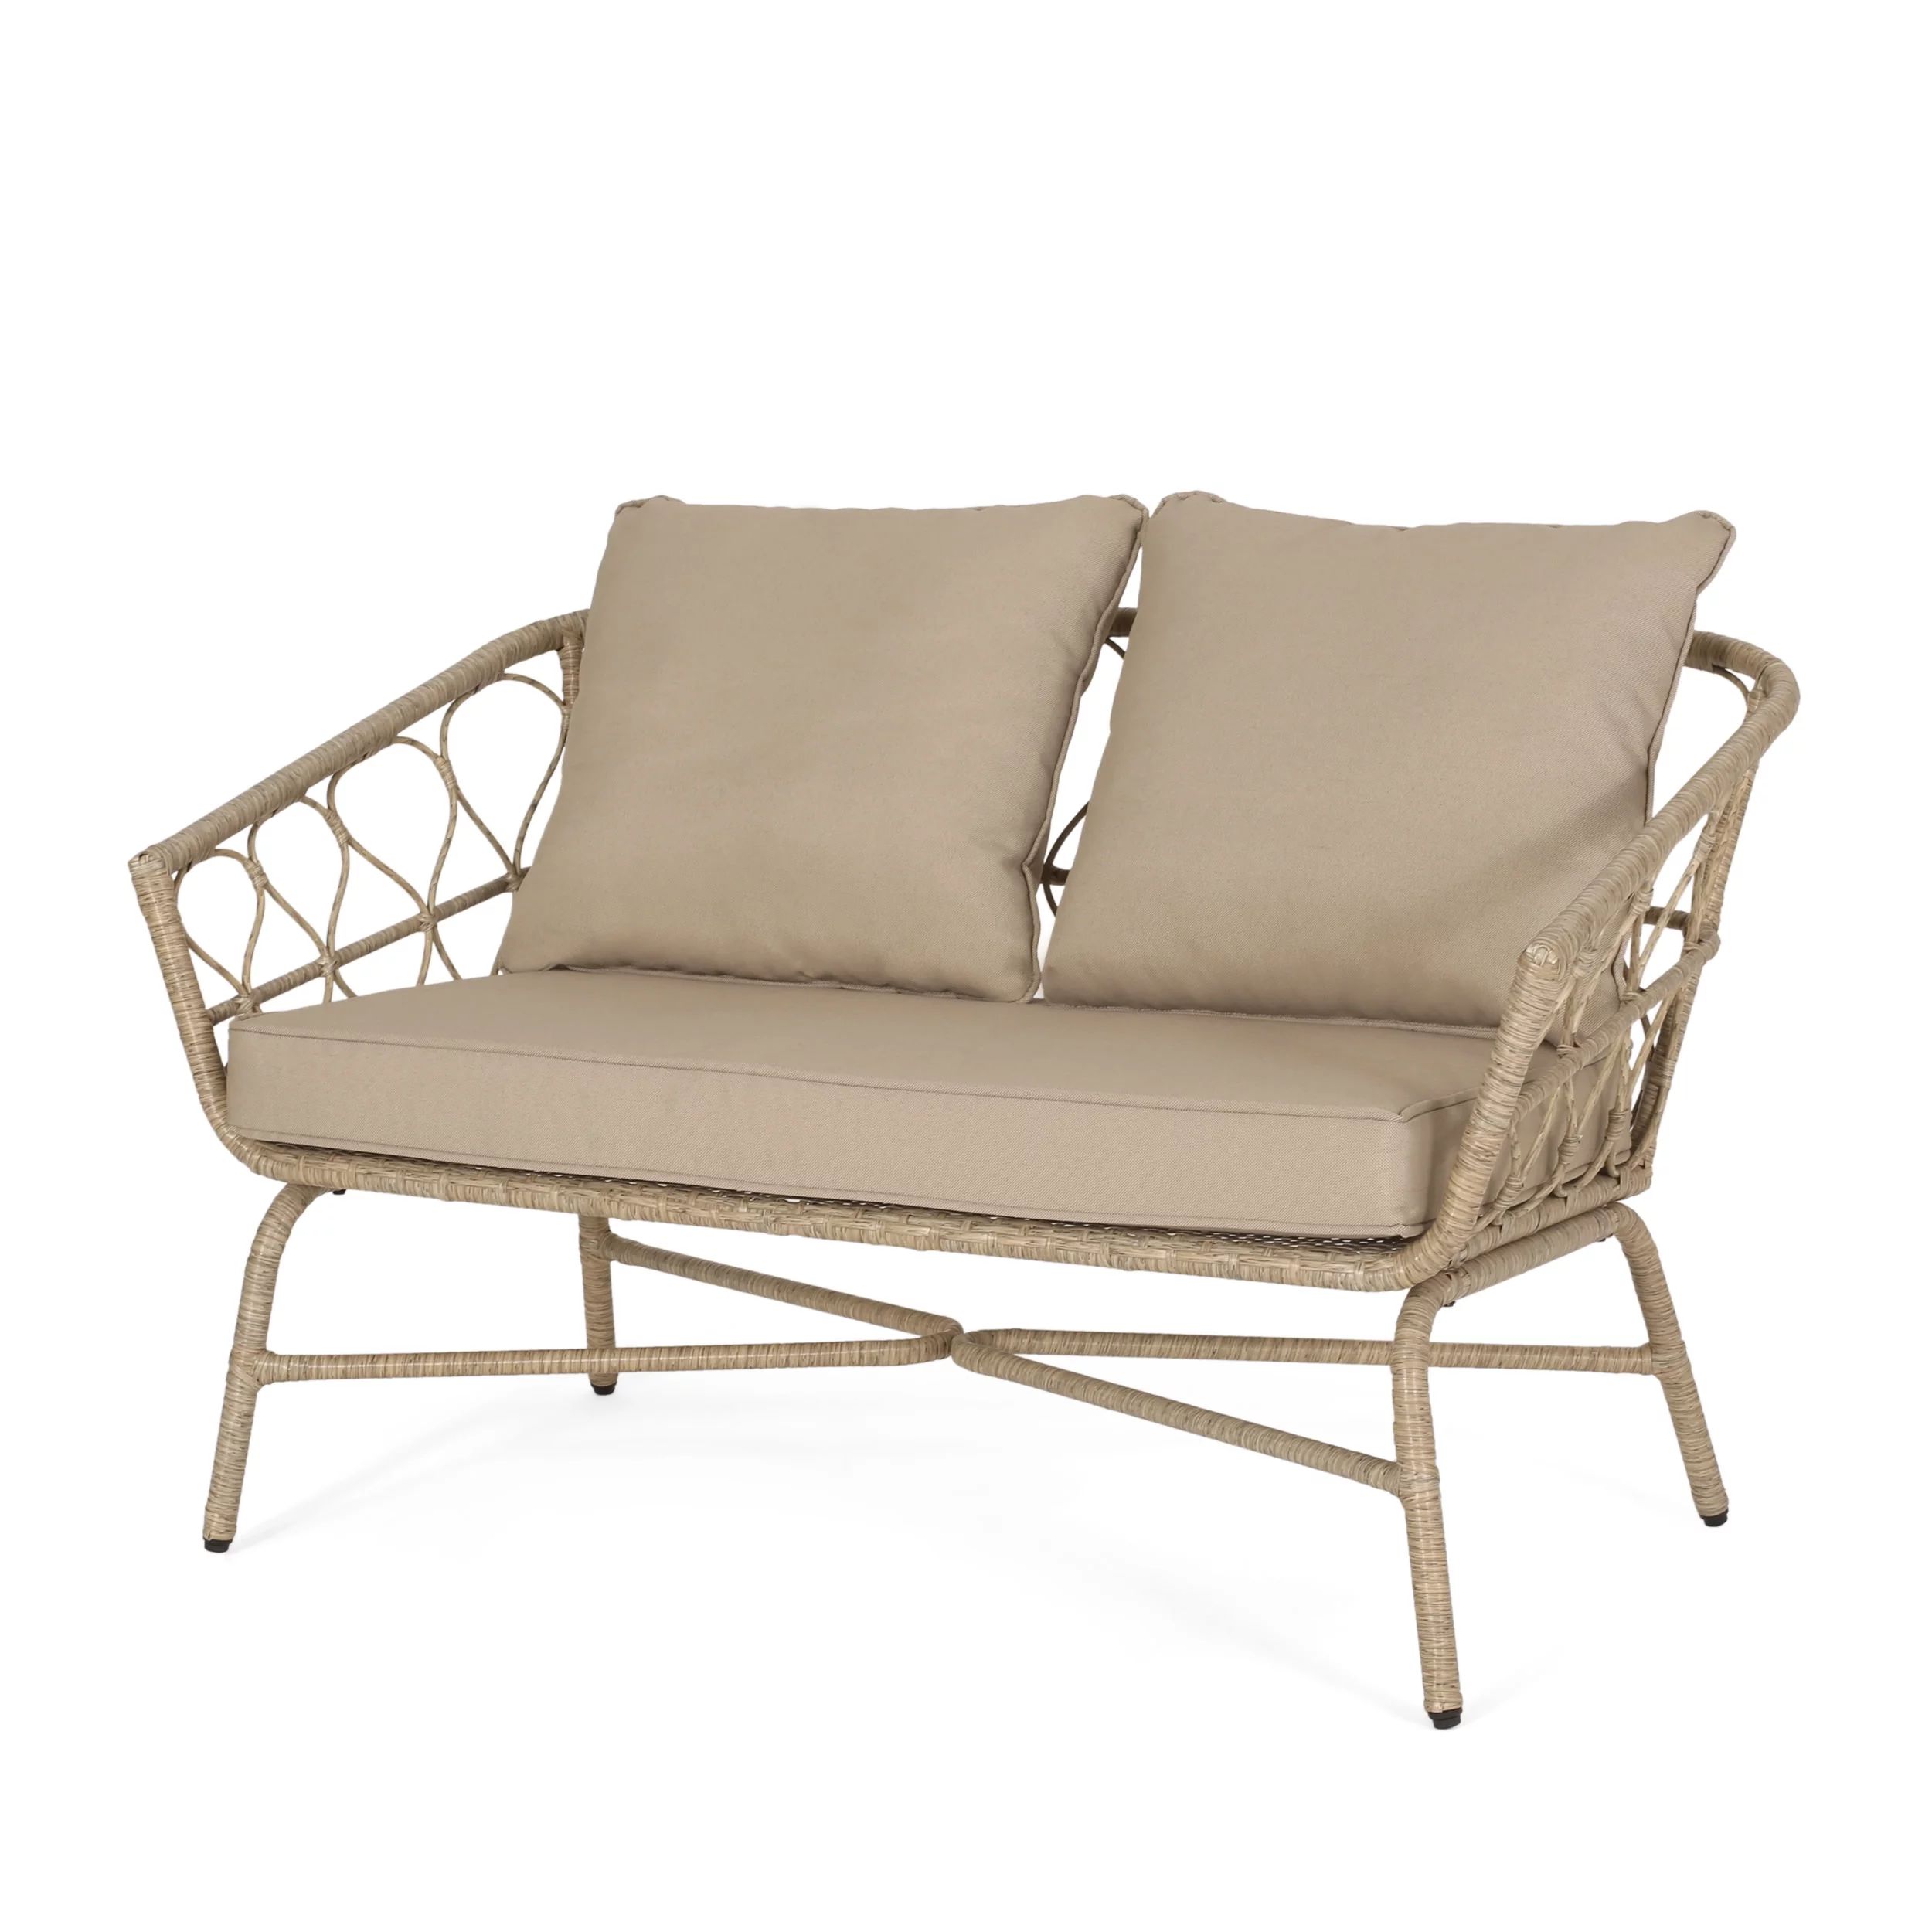 Colmar Outdoor Wicker Loveseat with Cushions, Light Brown and Beige | Walmart (US)